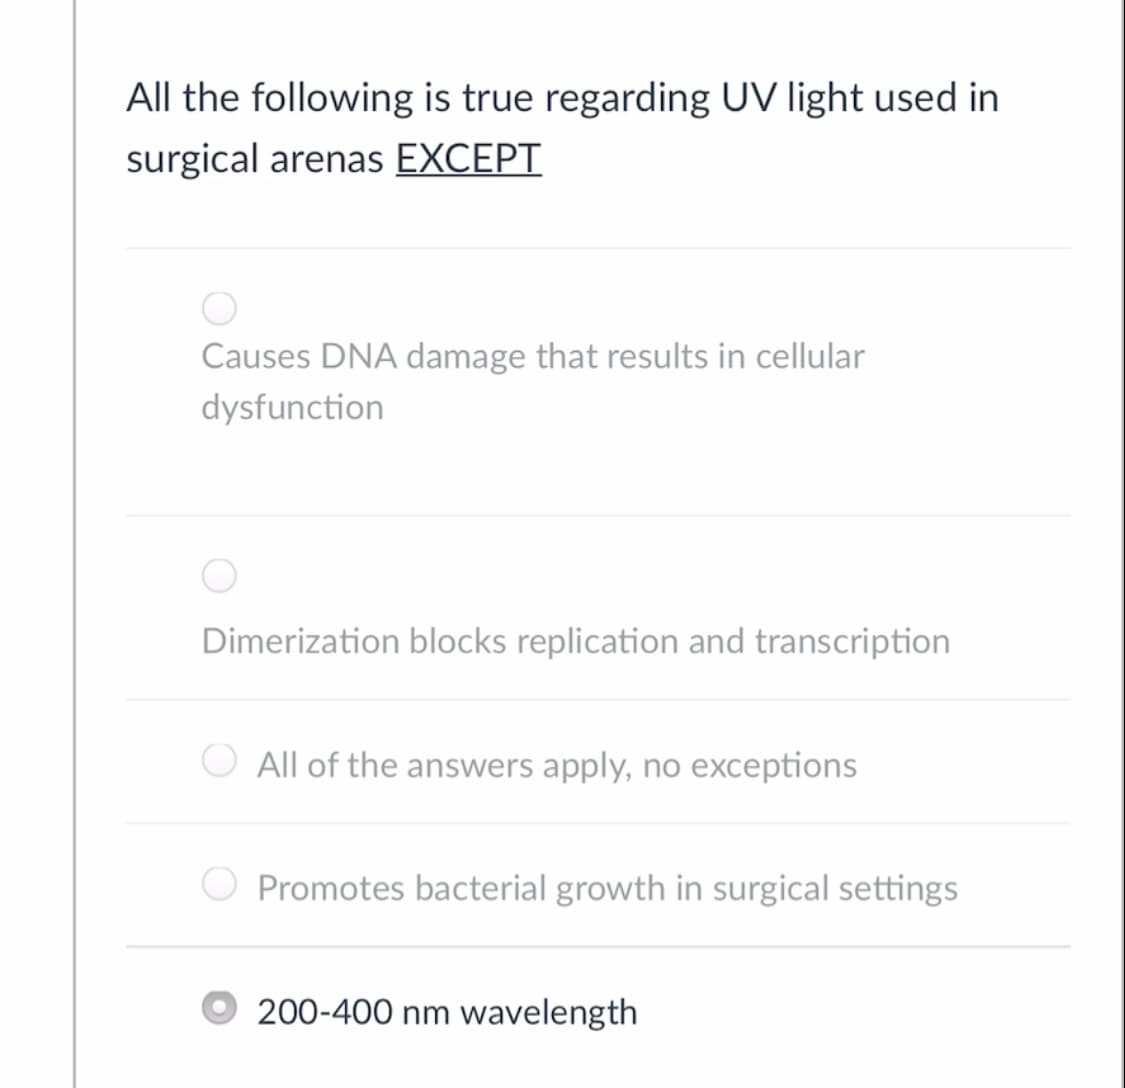 All the following is true regarding UV light used in
surgical arenas EXCEPT
Causes DNA damage that results in cellular
dysfunction
Dimerization blocks replication and transcription
All of the answers apply, no exceptions
O Promotes bacterial growth in surgical settings
200-400 nm wavelength
